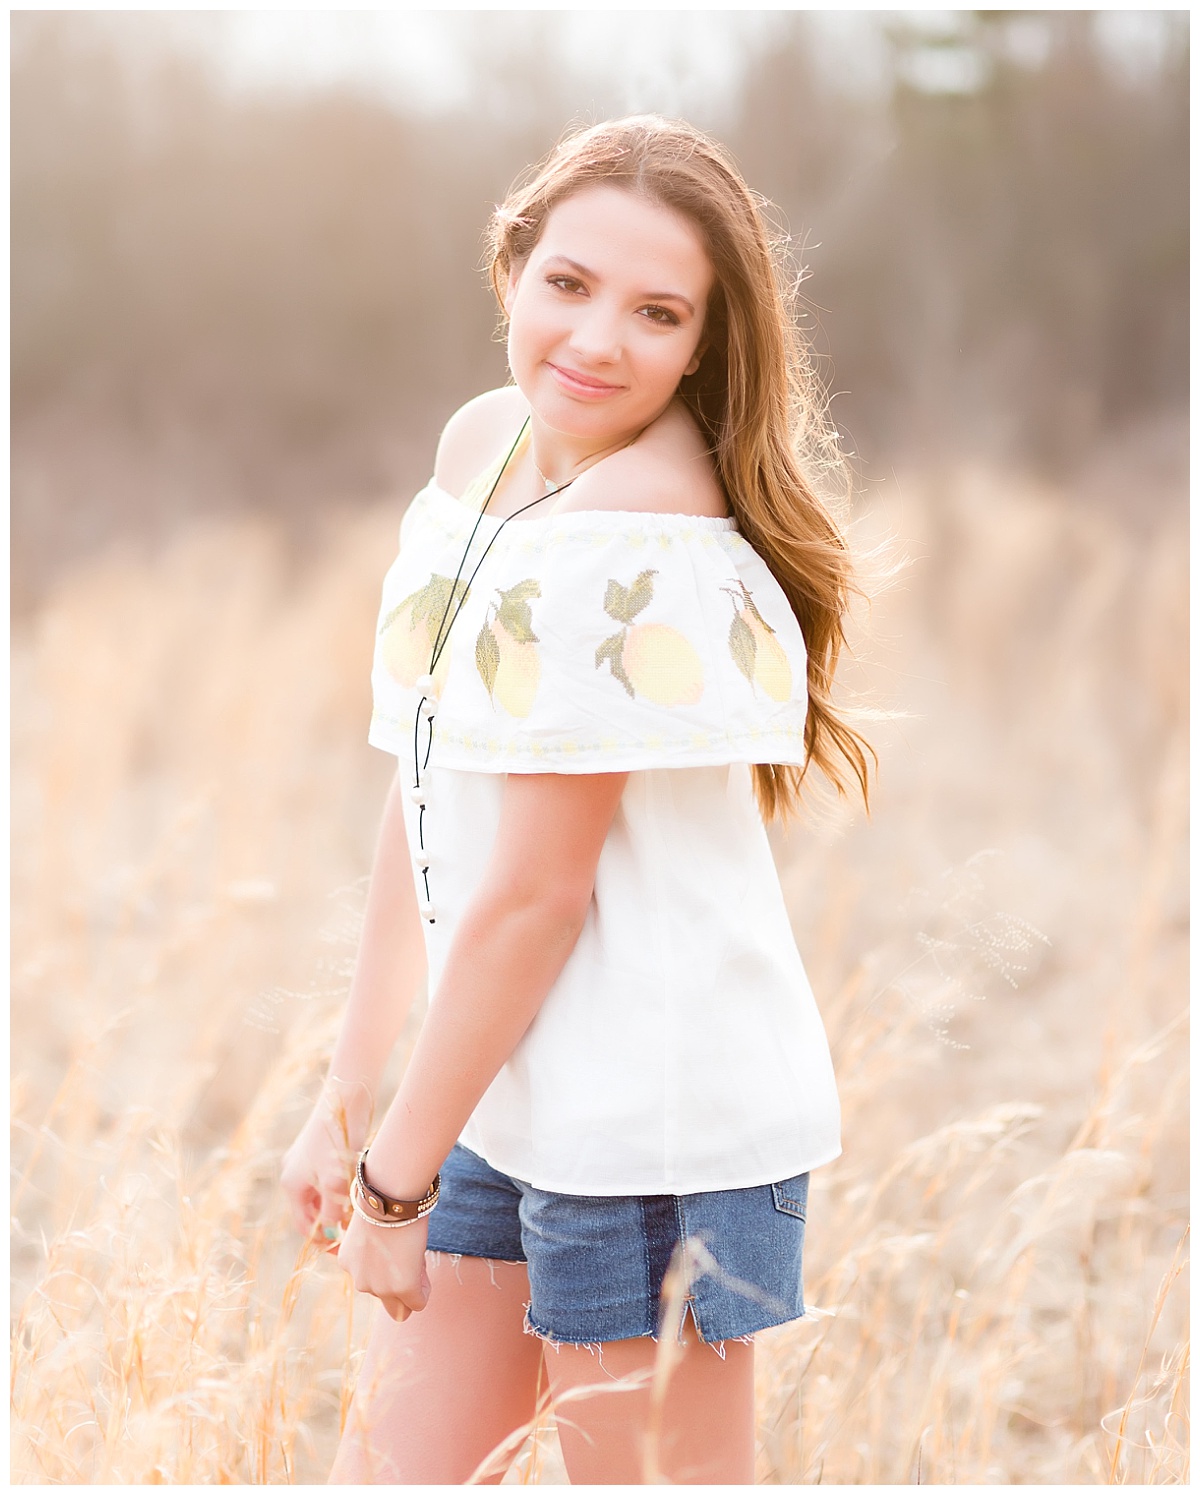 senior girl-3/4 length-standing in field of wheat colored grass